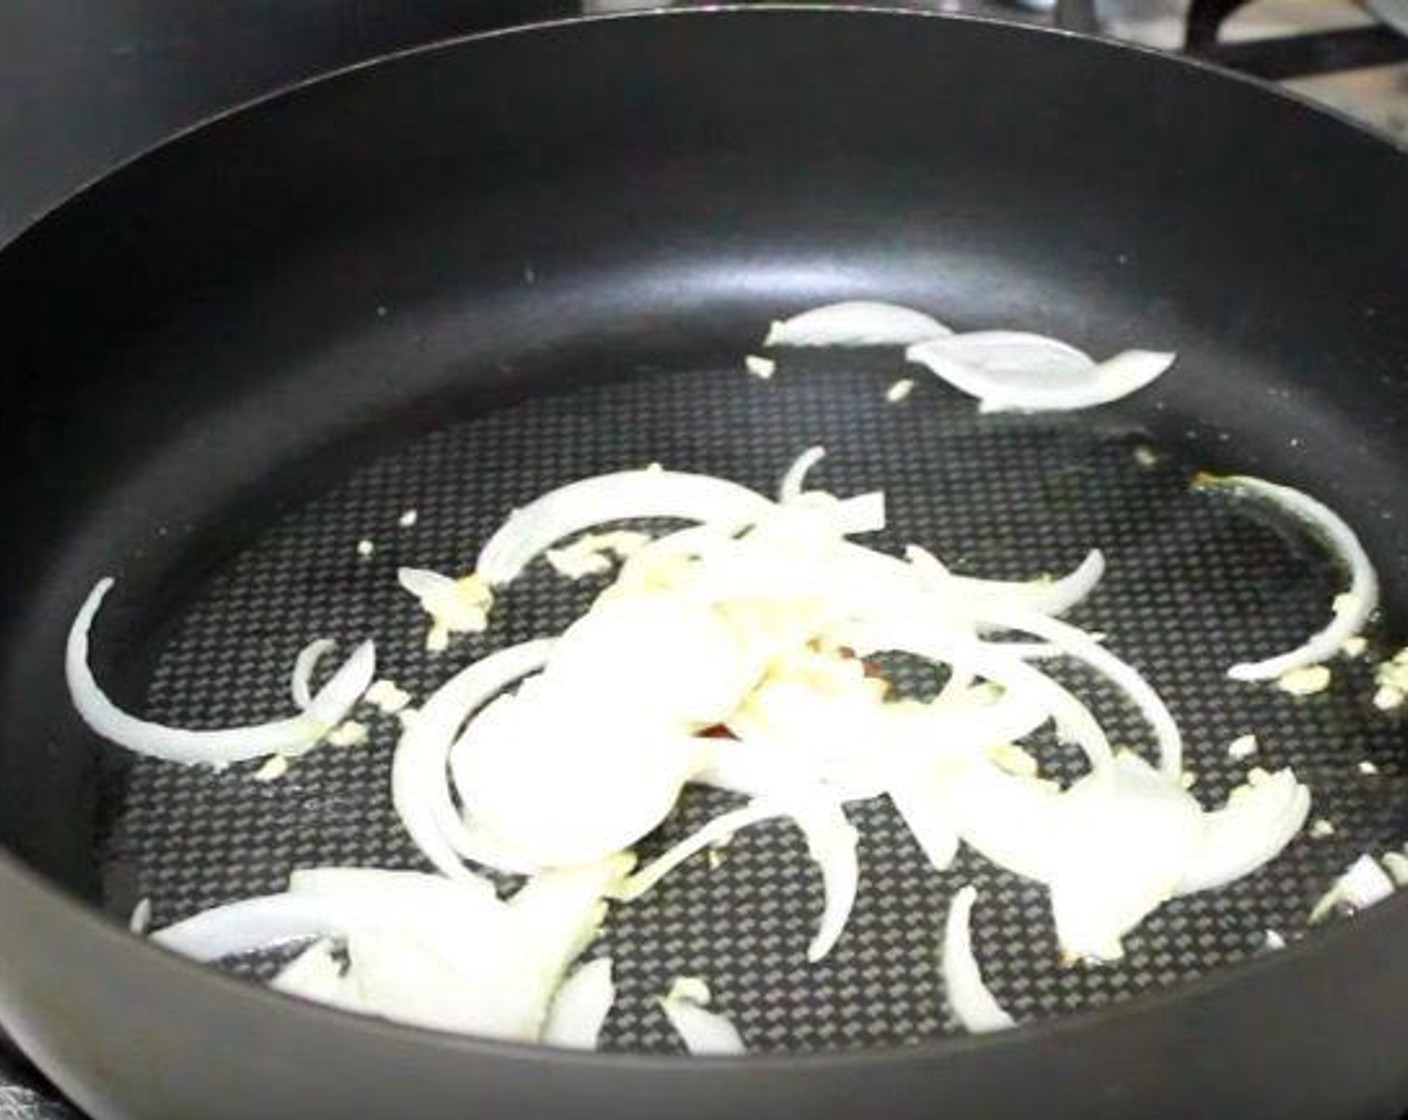 step 1 In a skillet, add Extra-Virgin Olive Oil (2 Tbsp), Onion (1), and Garlic (4 cloves). Cook for 1-2 minutes, or until onion and garlic are fragrant.